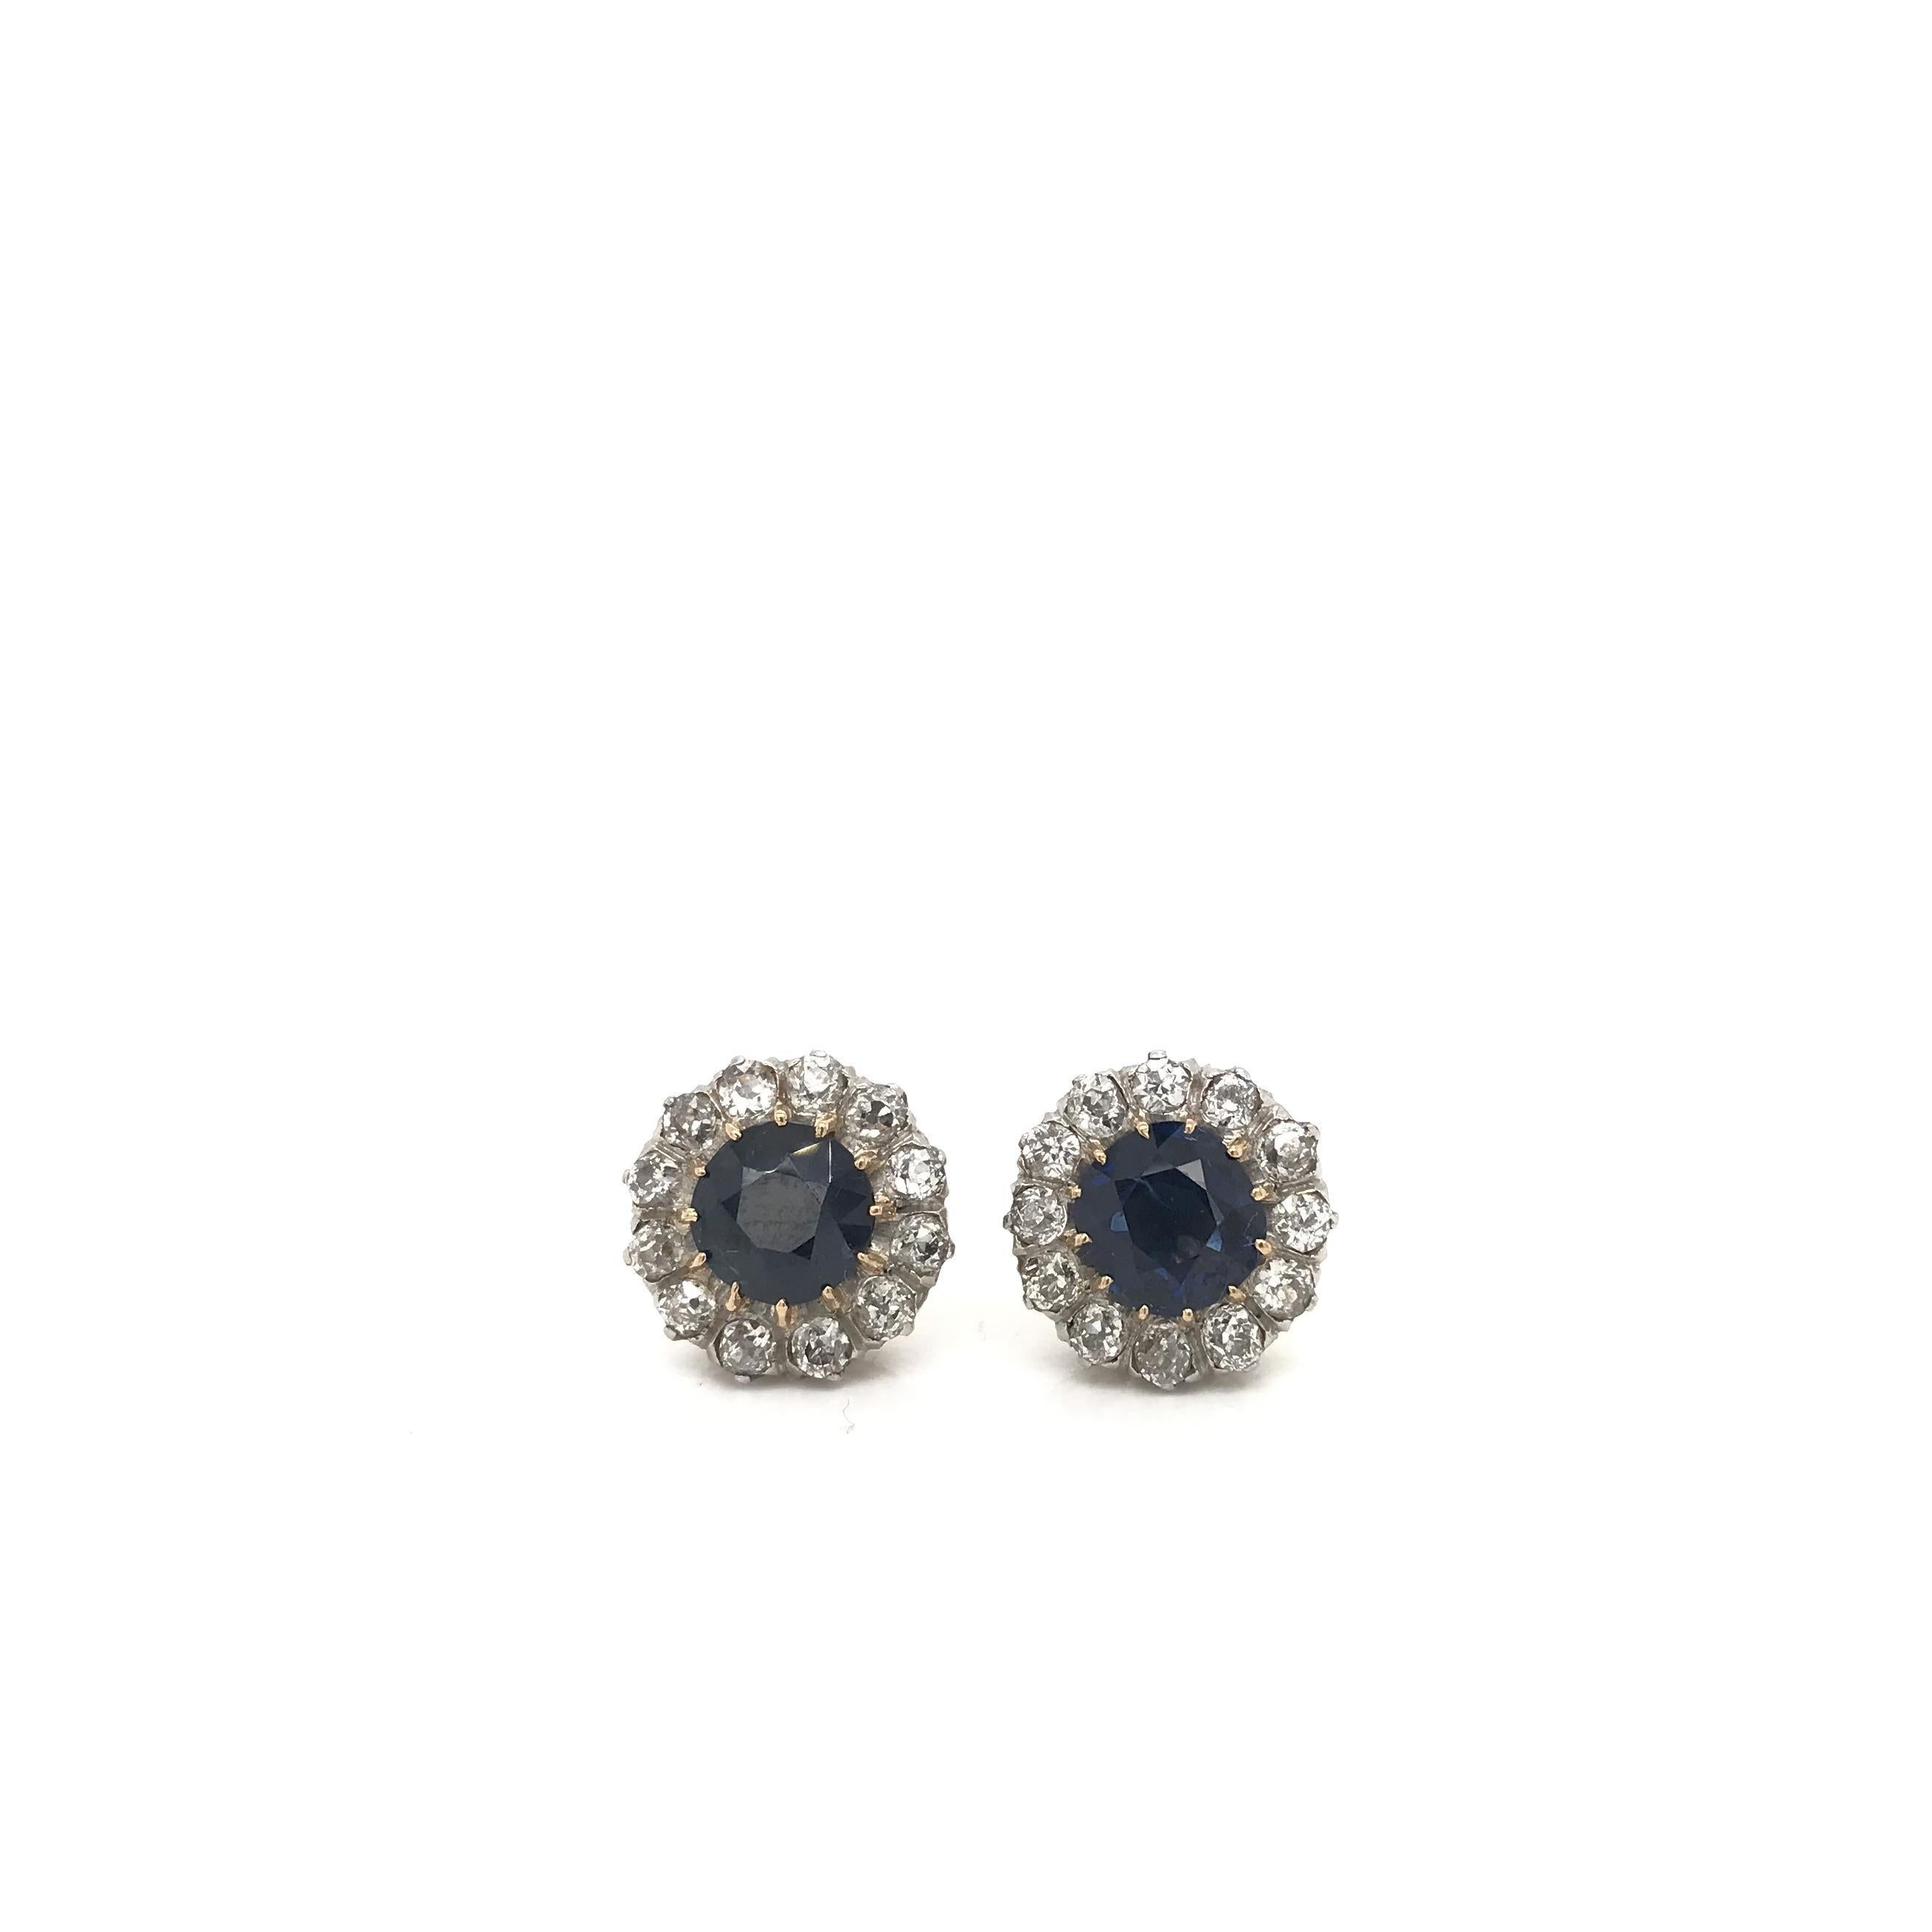 Antique Edwardian Sapphire and Diamond Earrings 2